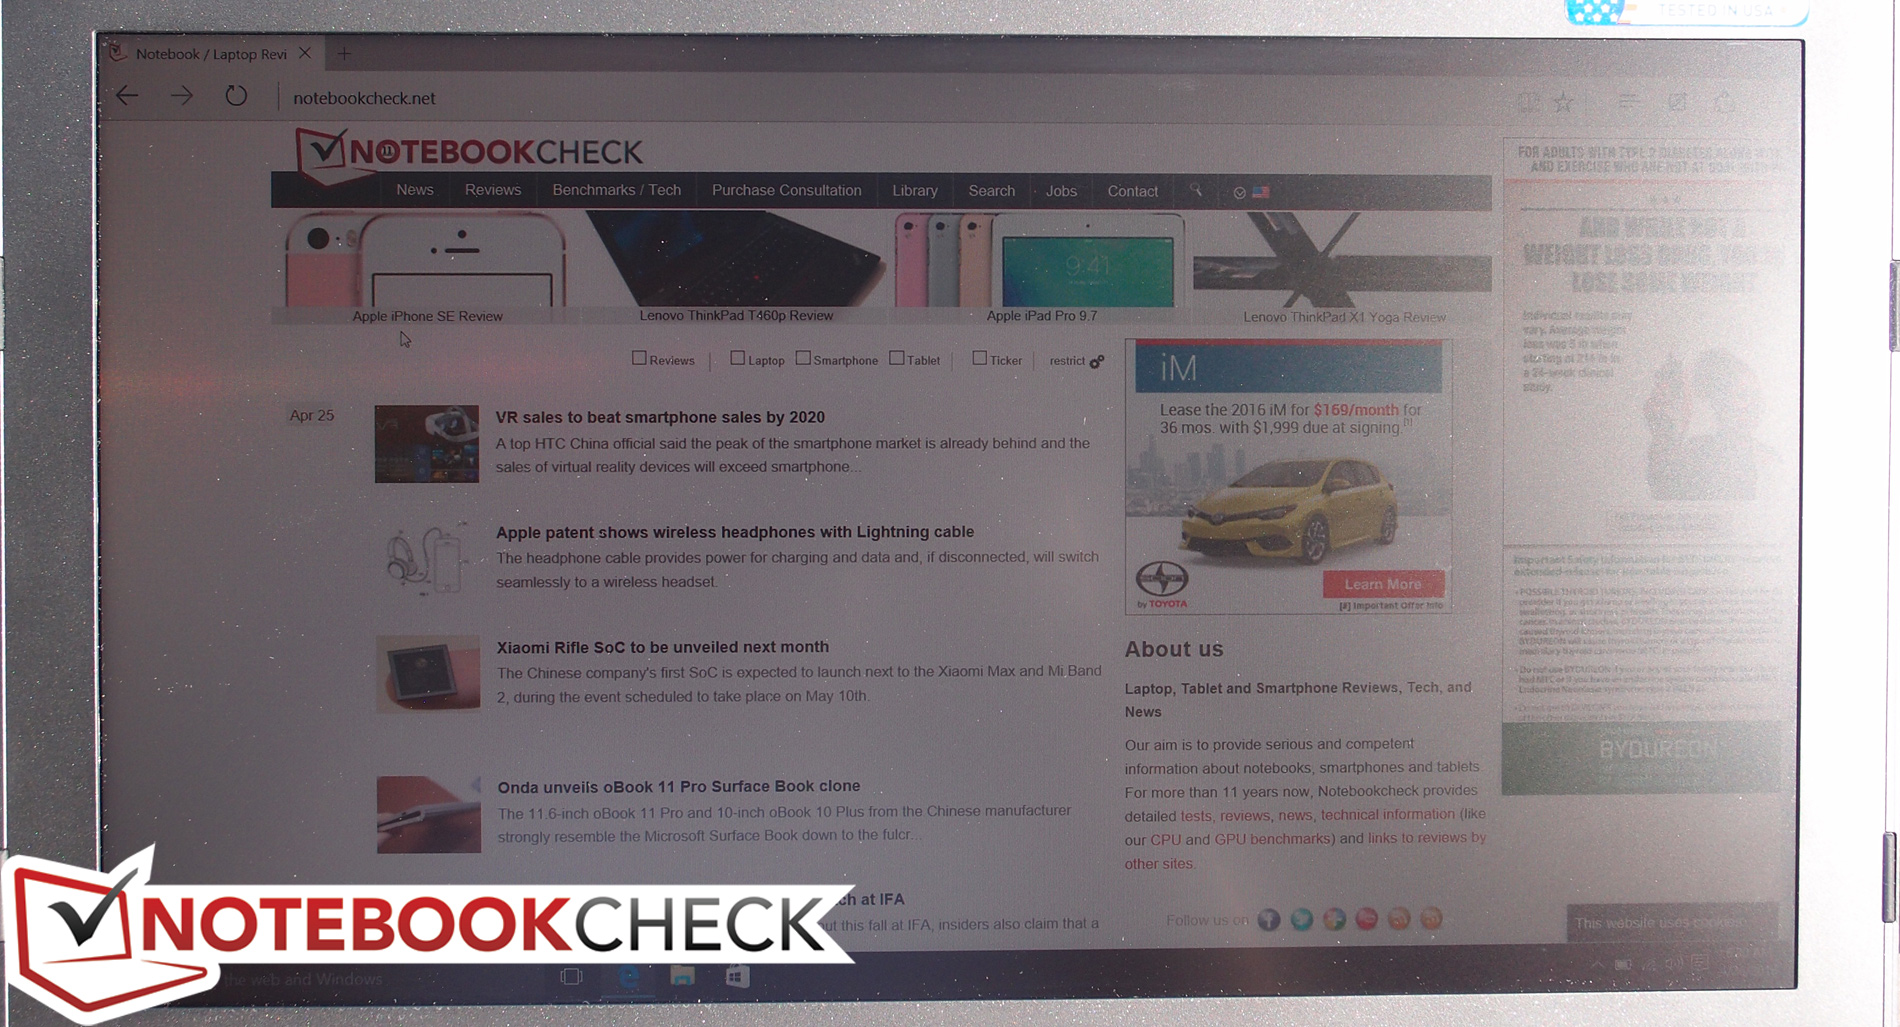 MSI PX60 6QD Prestige iBuyPower Edition Notebook Review - NotebookCheck